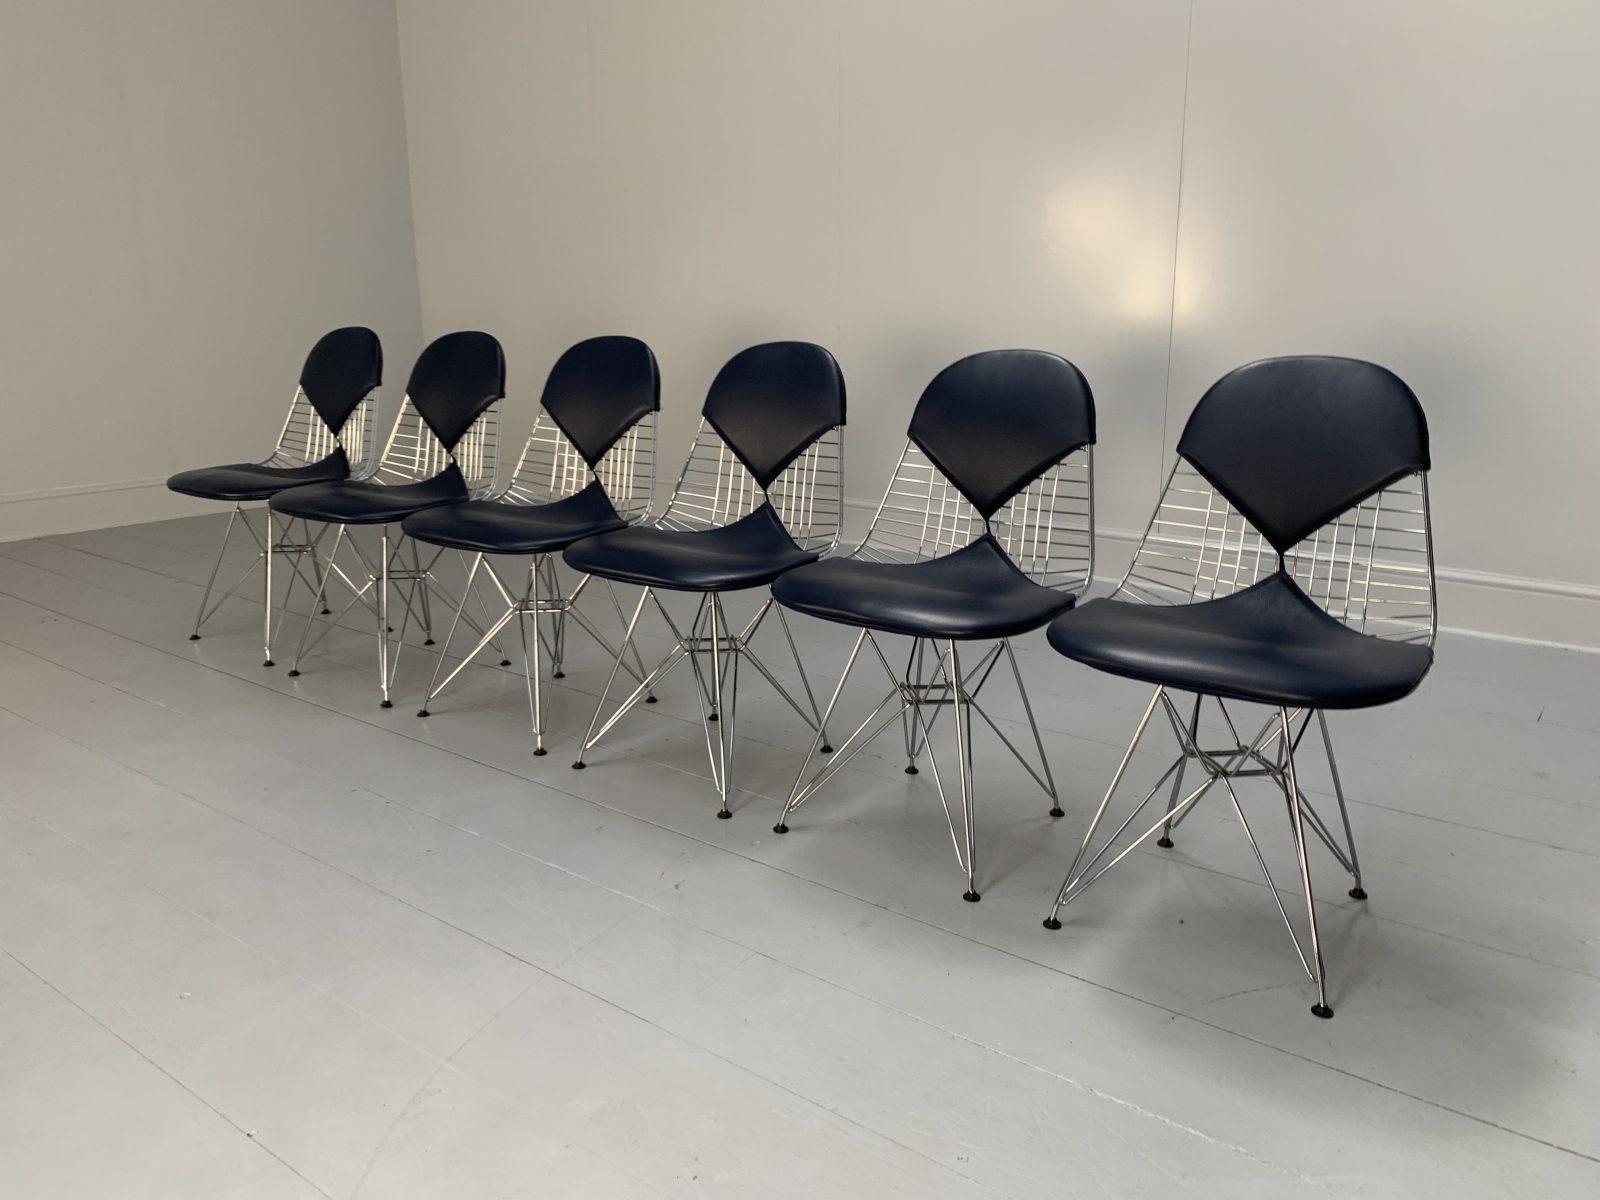 Suite of 6 Vitra “Eames DKR-2 Bikini” Chairs in Navy Blue Premium Leather For Sale 1